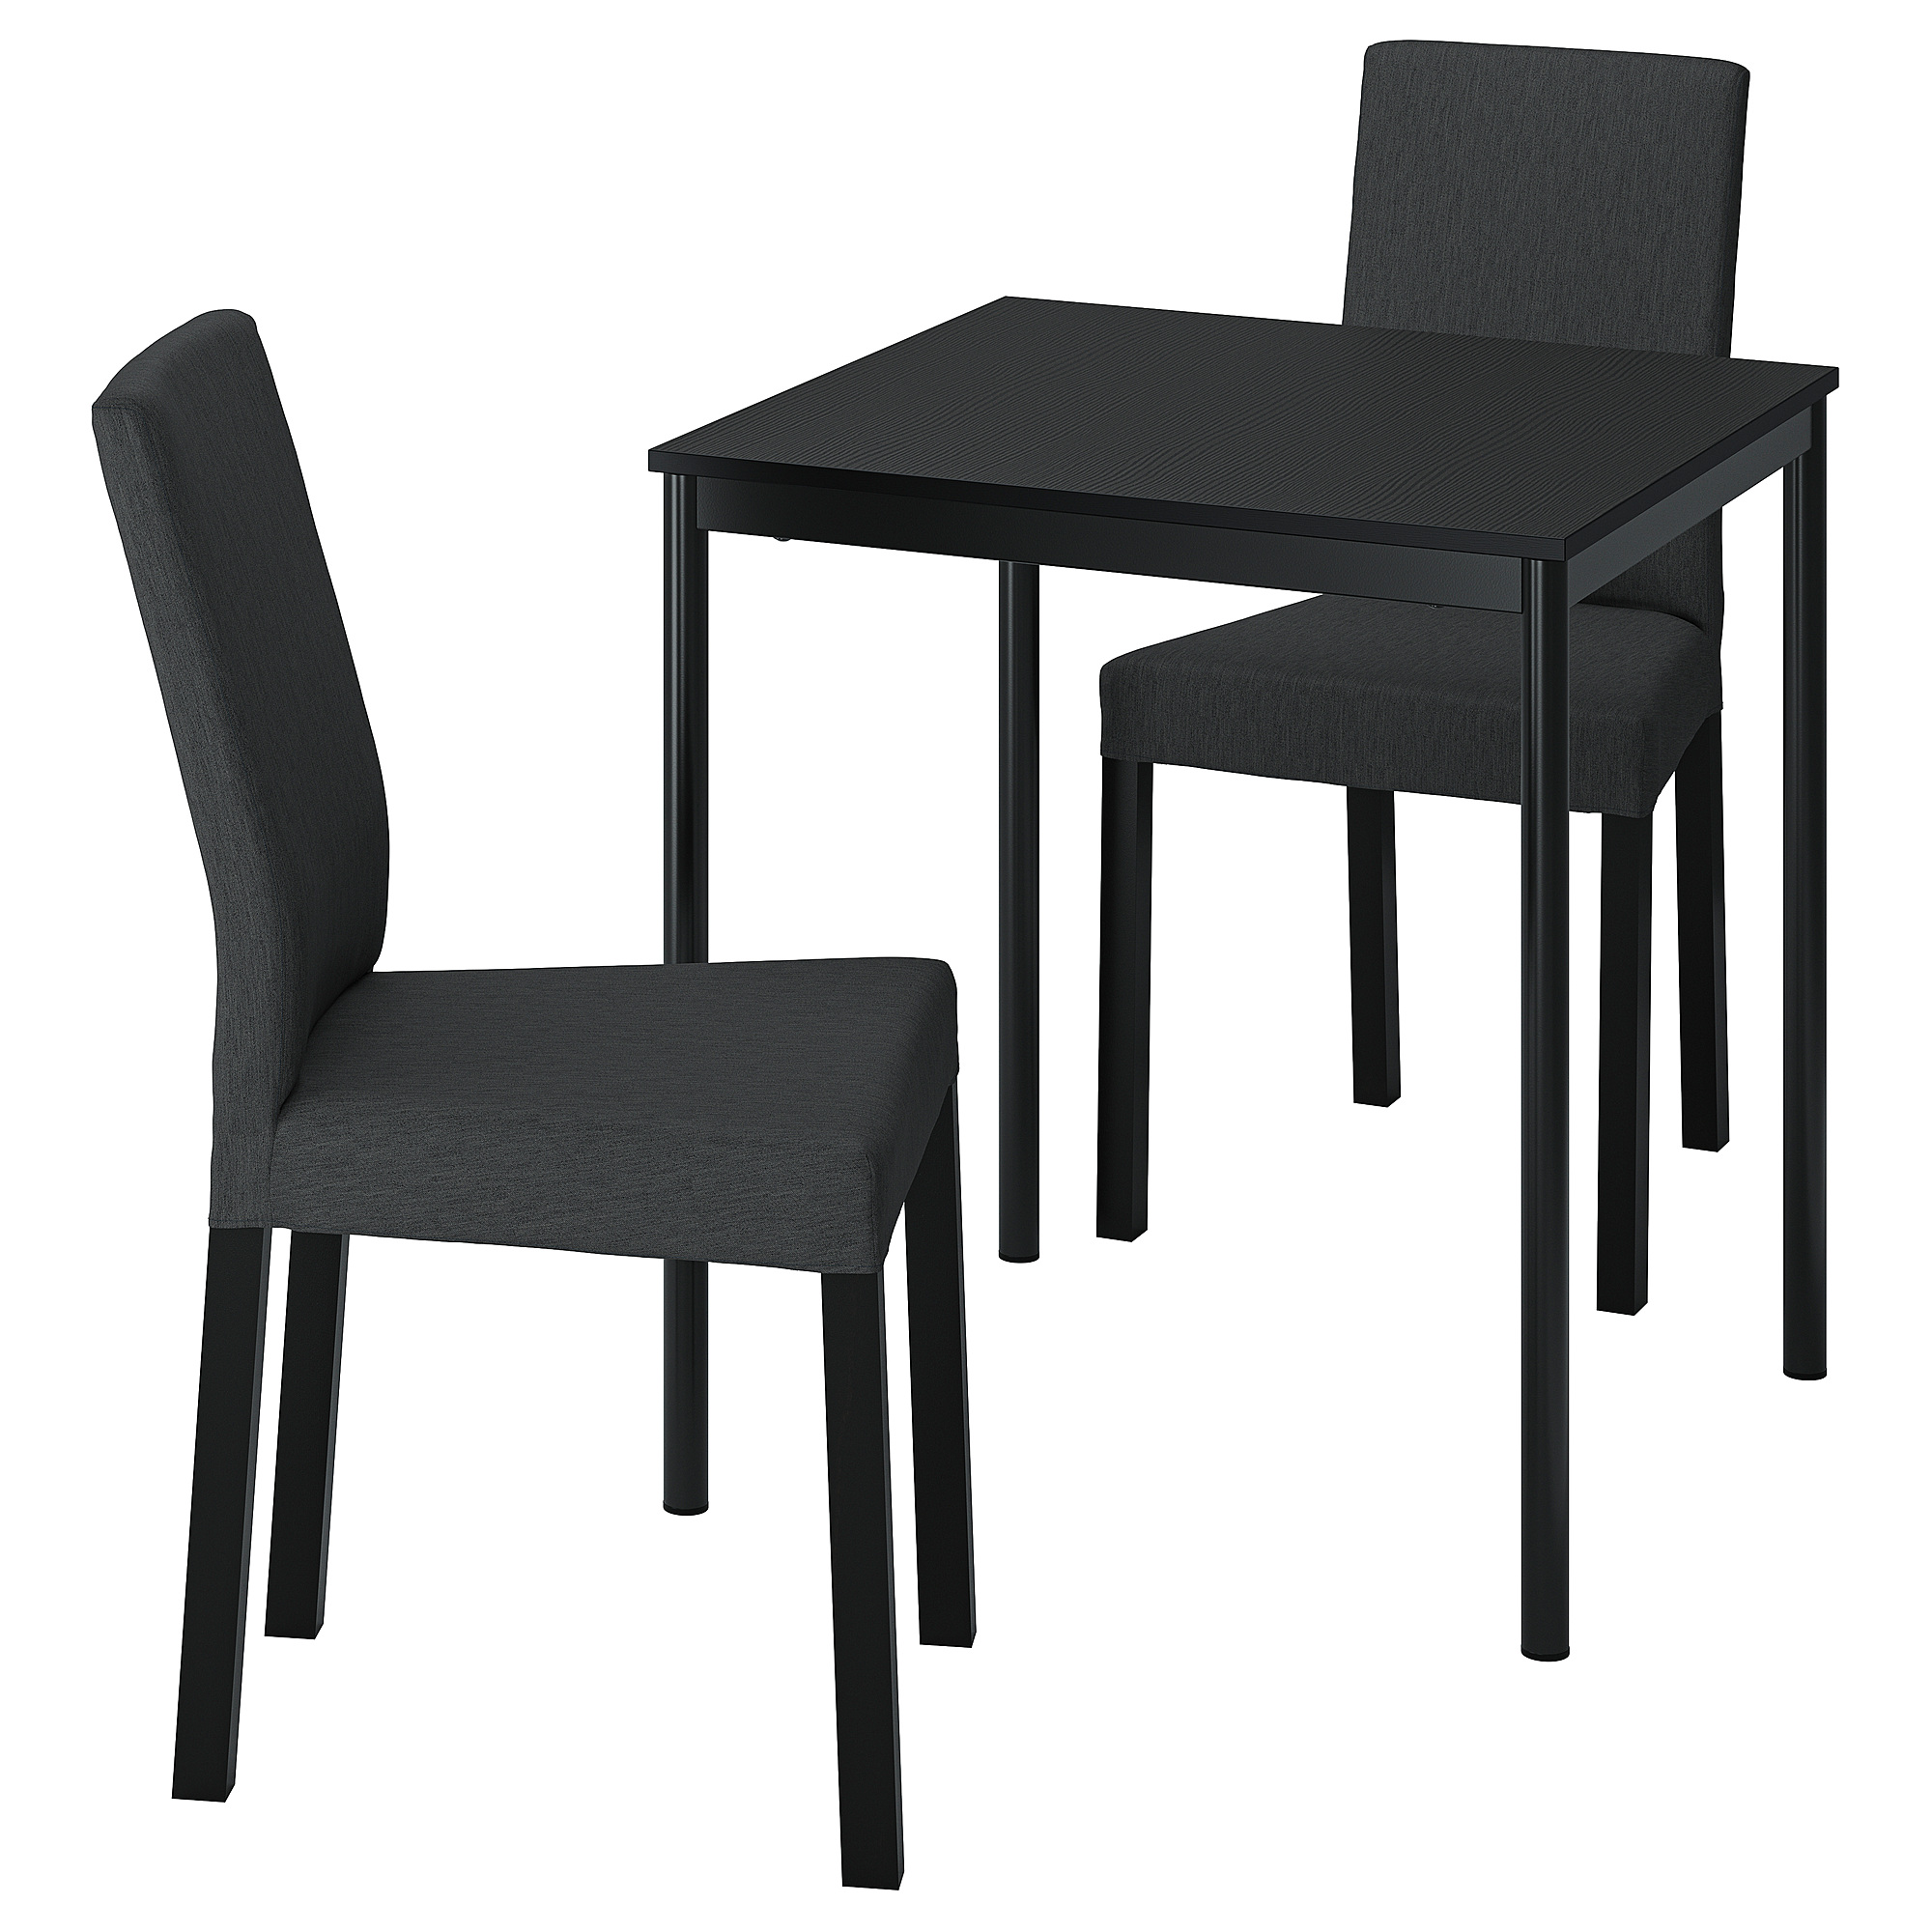 SANDSBERG/KÄTTIL table and 2 chairs